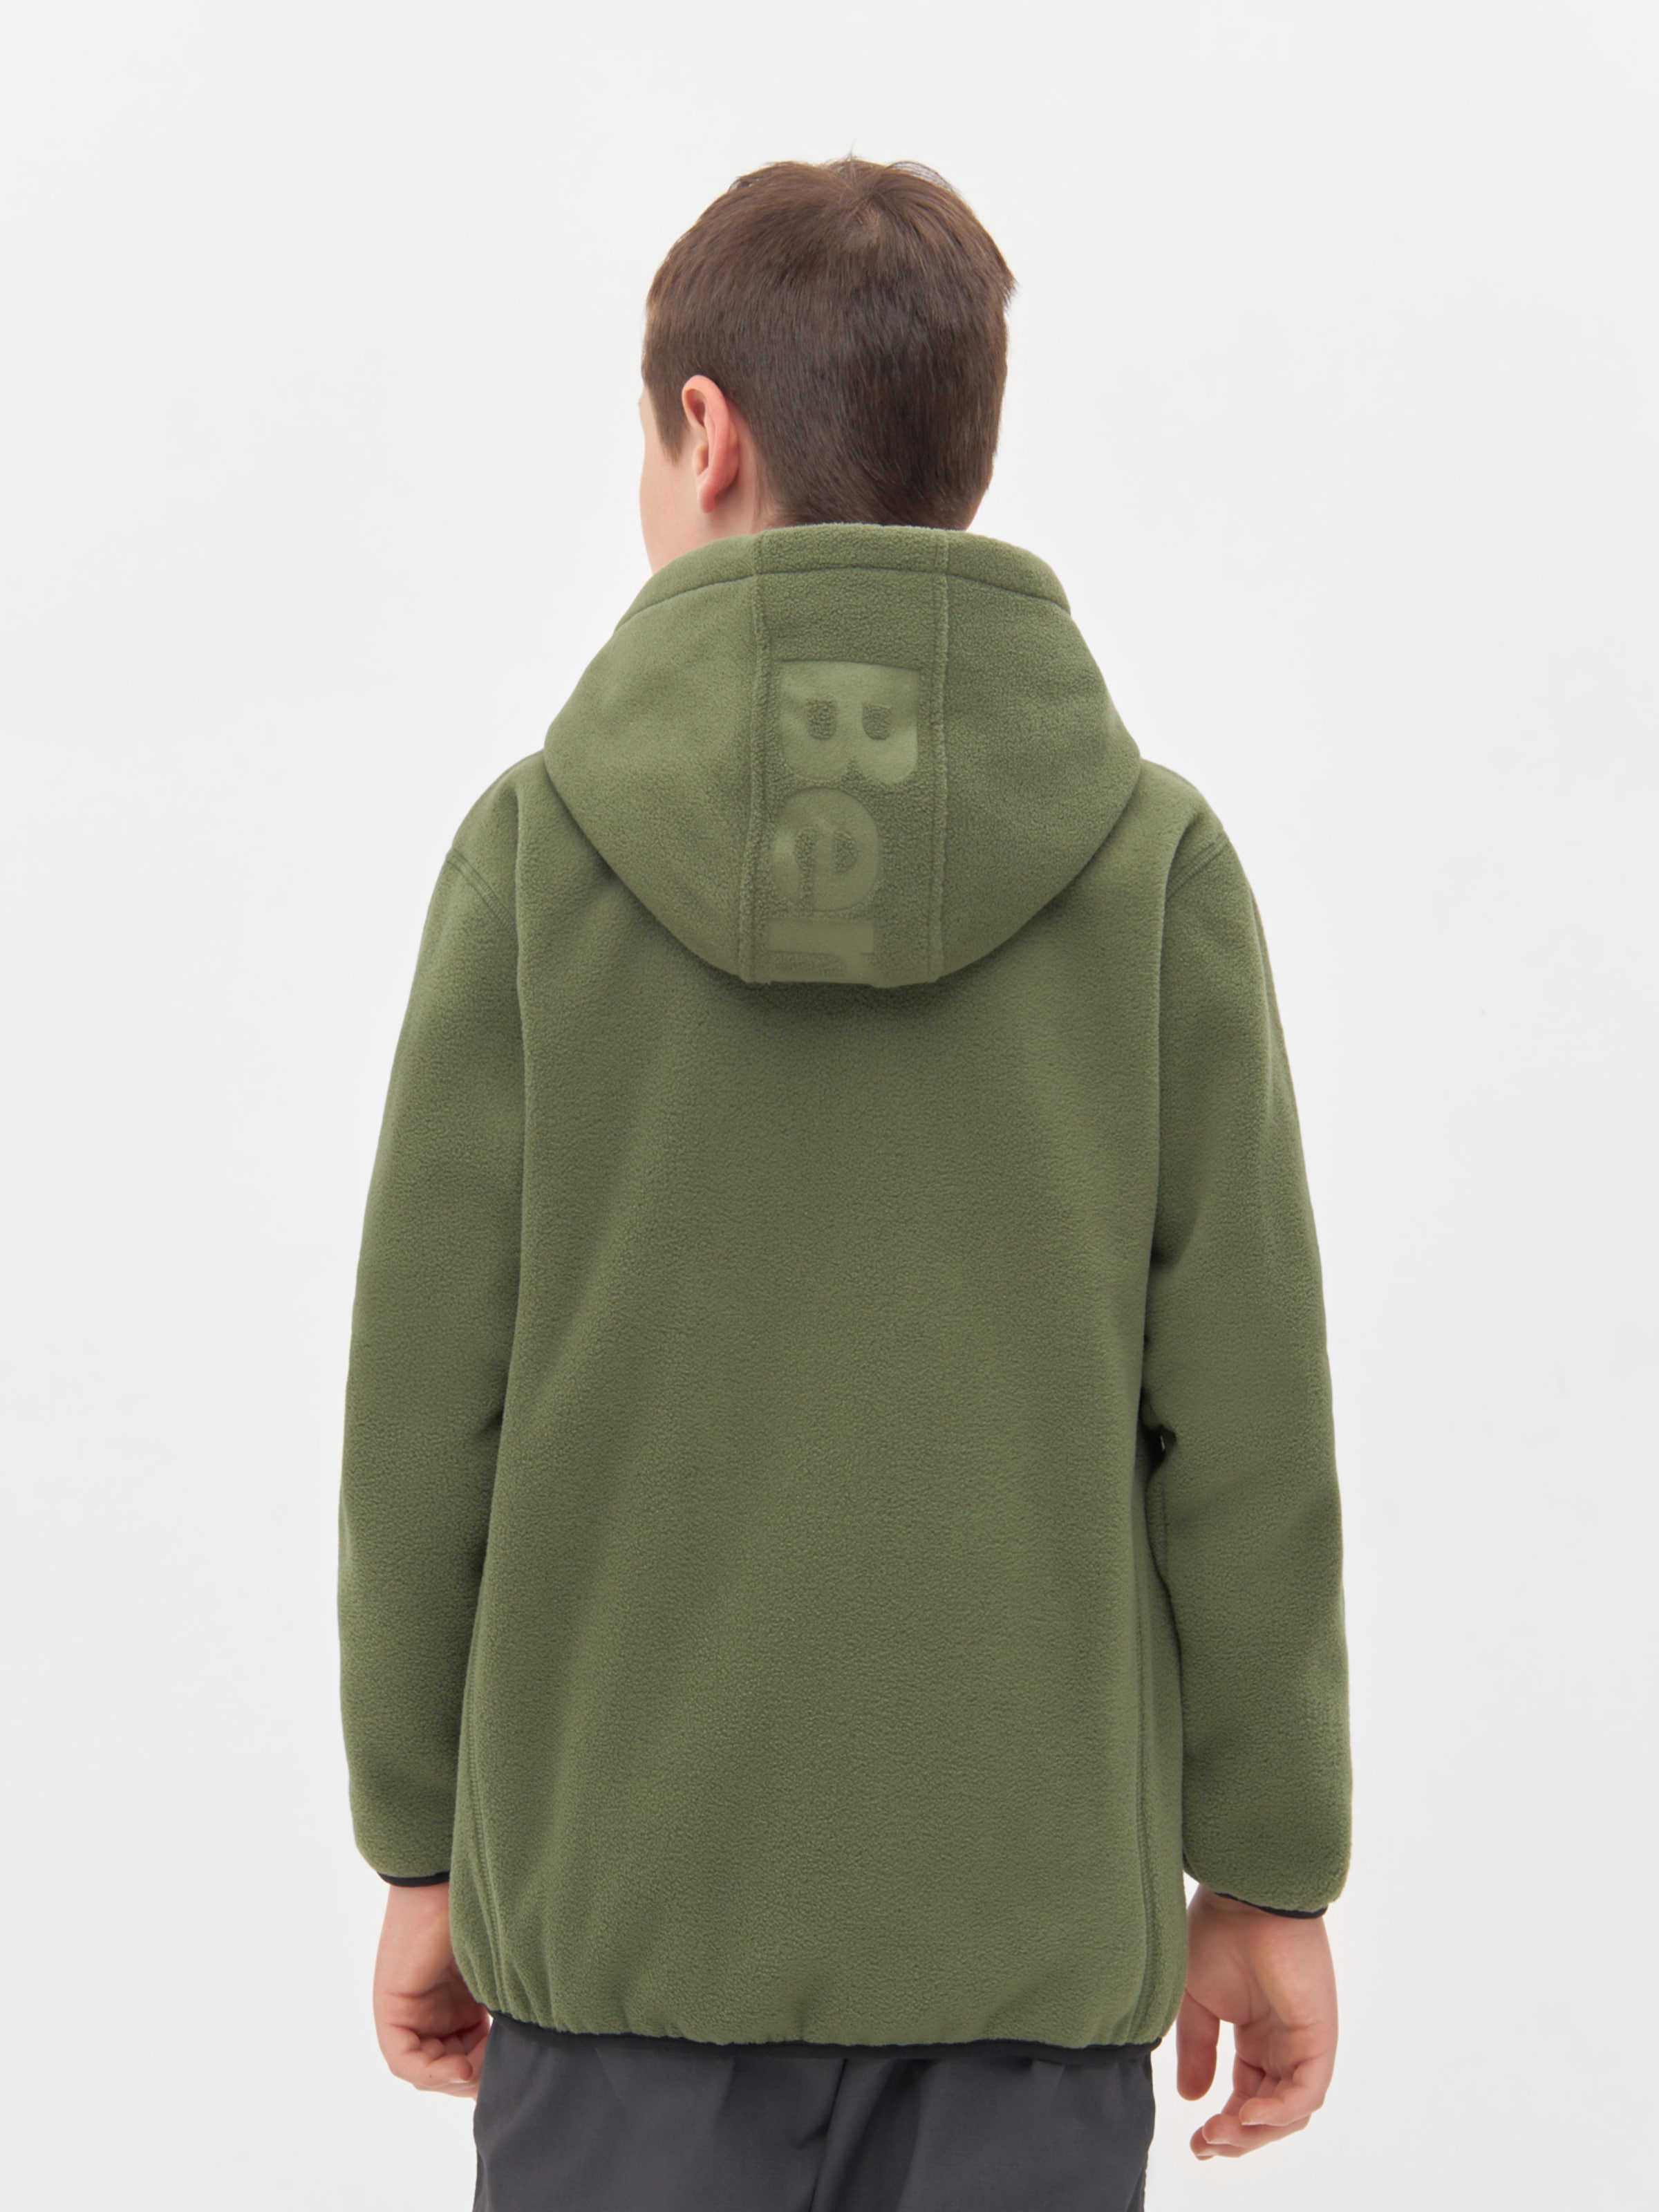 Fleece Jacket in Olive | \'DRAKEN\' YOU ABOUT BENCH